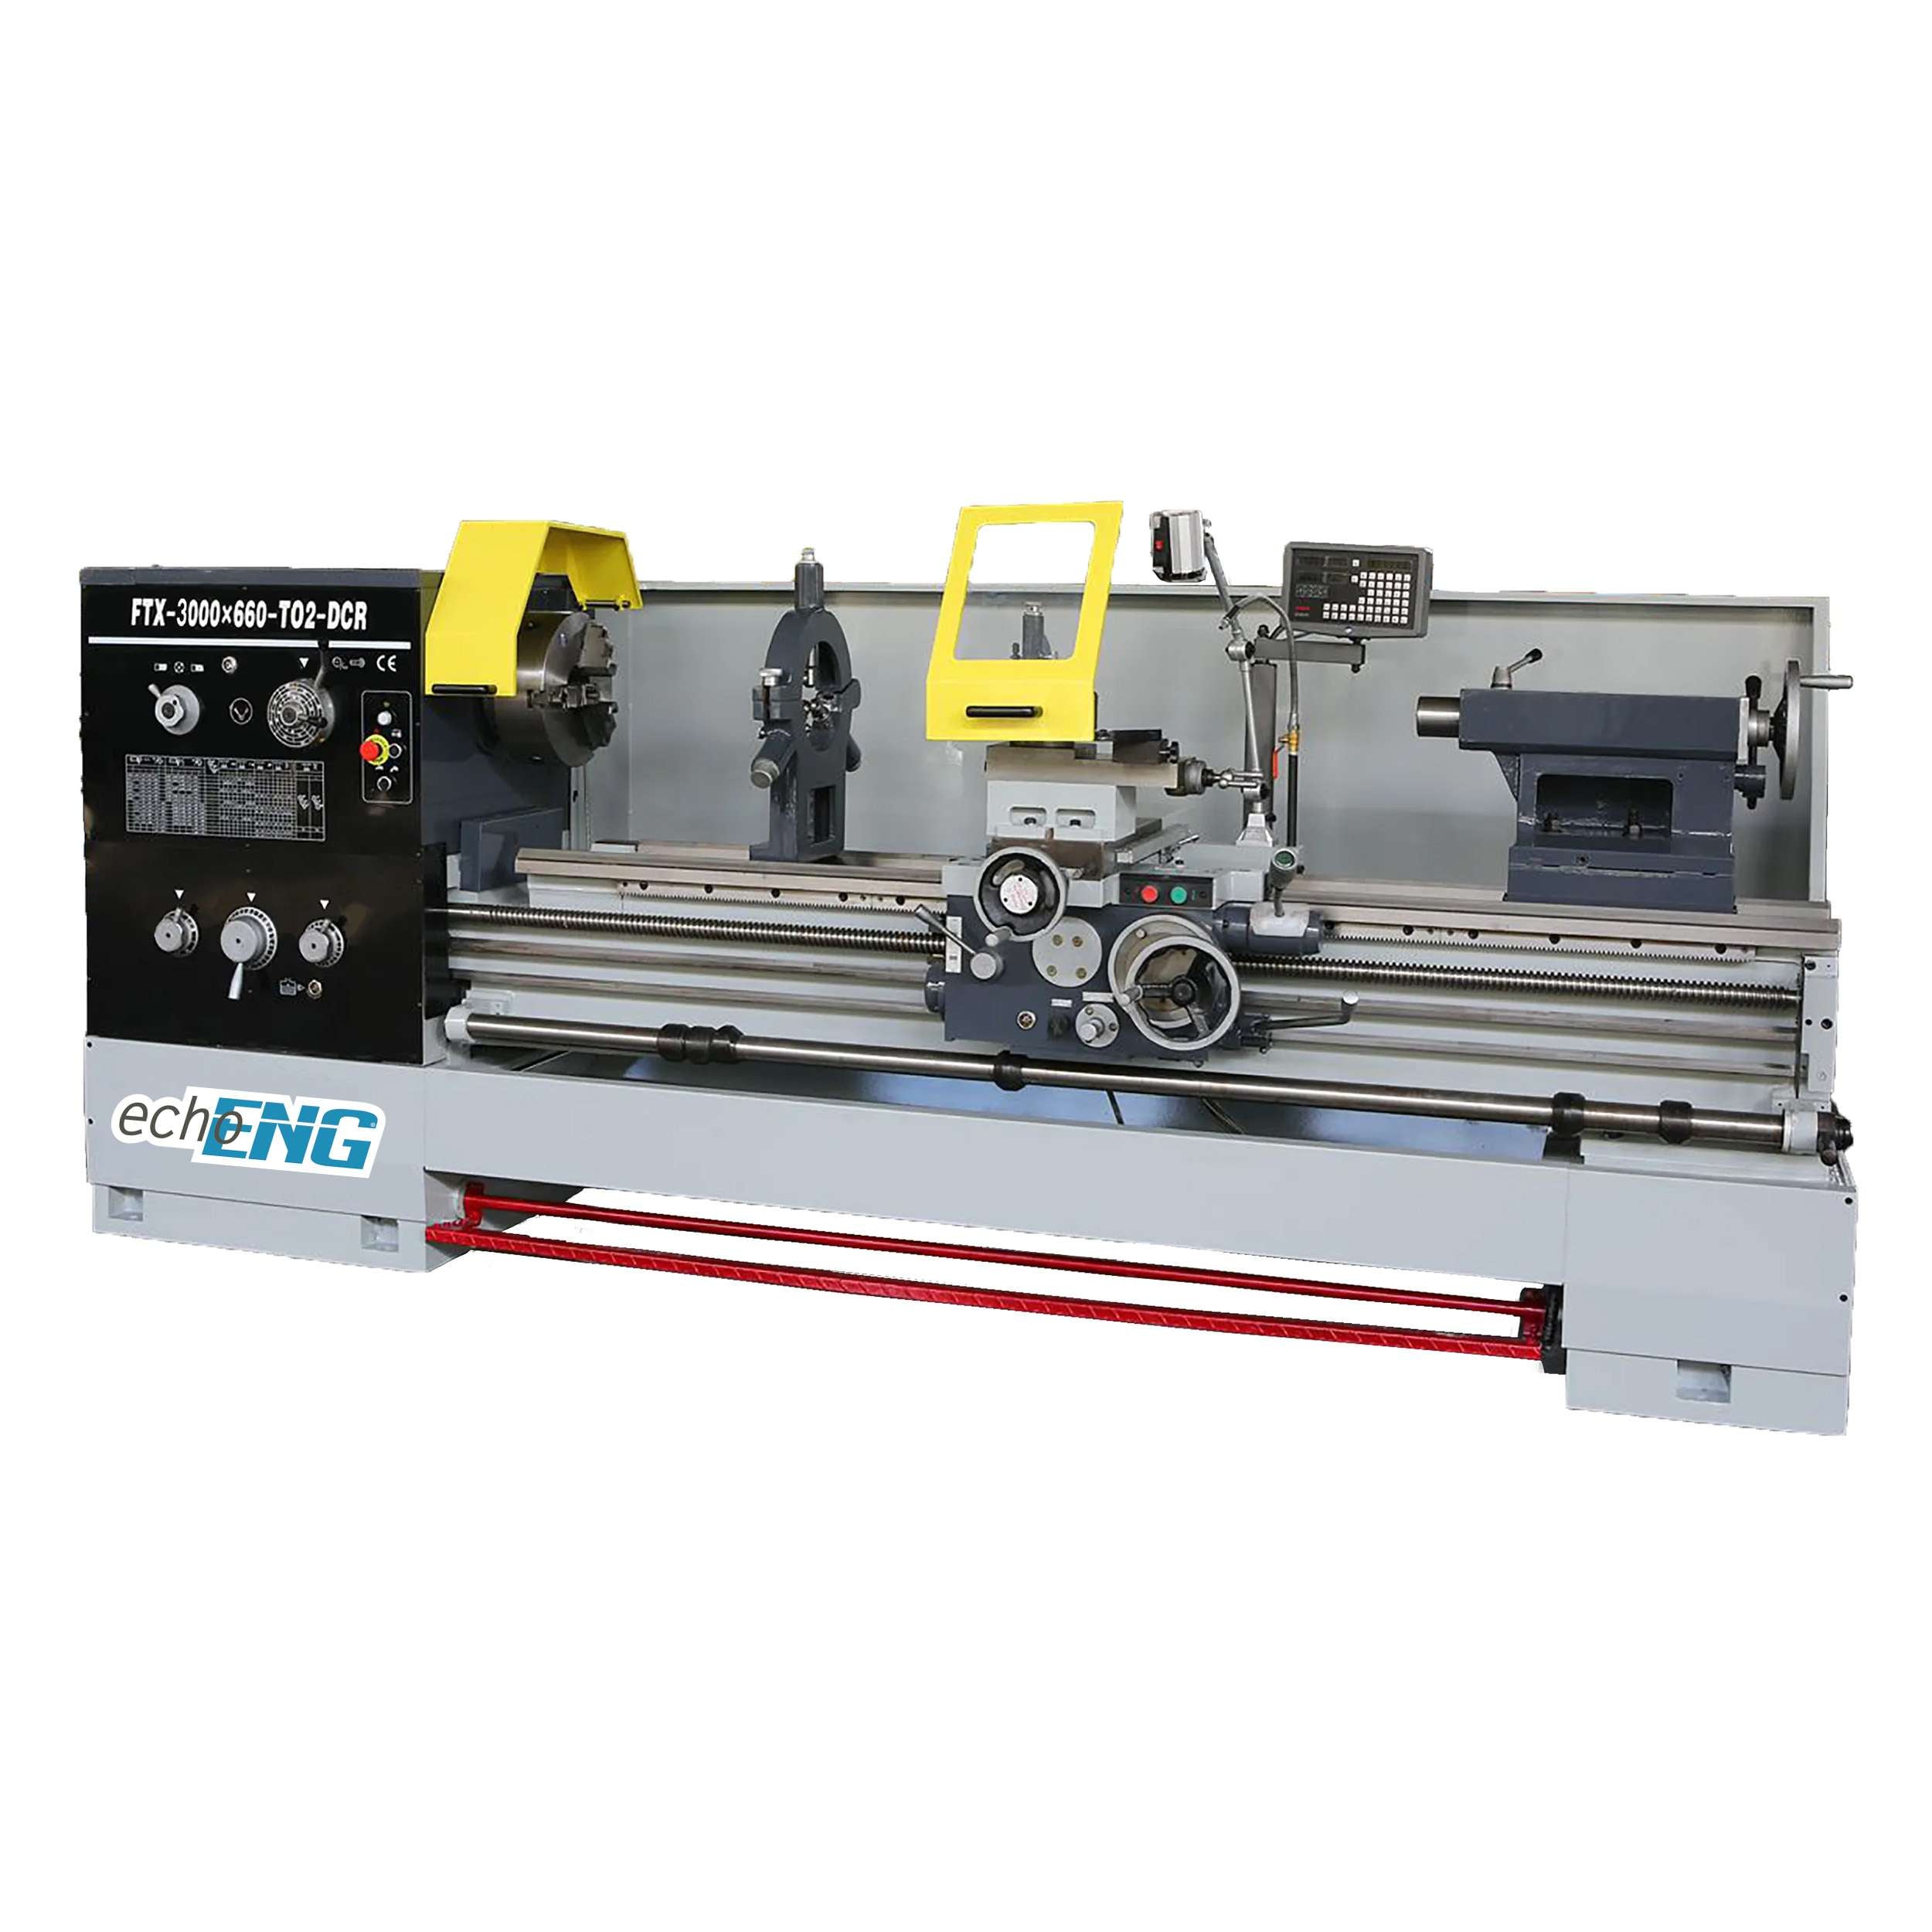 EchoENG 400V parallel lathe with digital display - FTX-3000X660-TO2 DCR